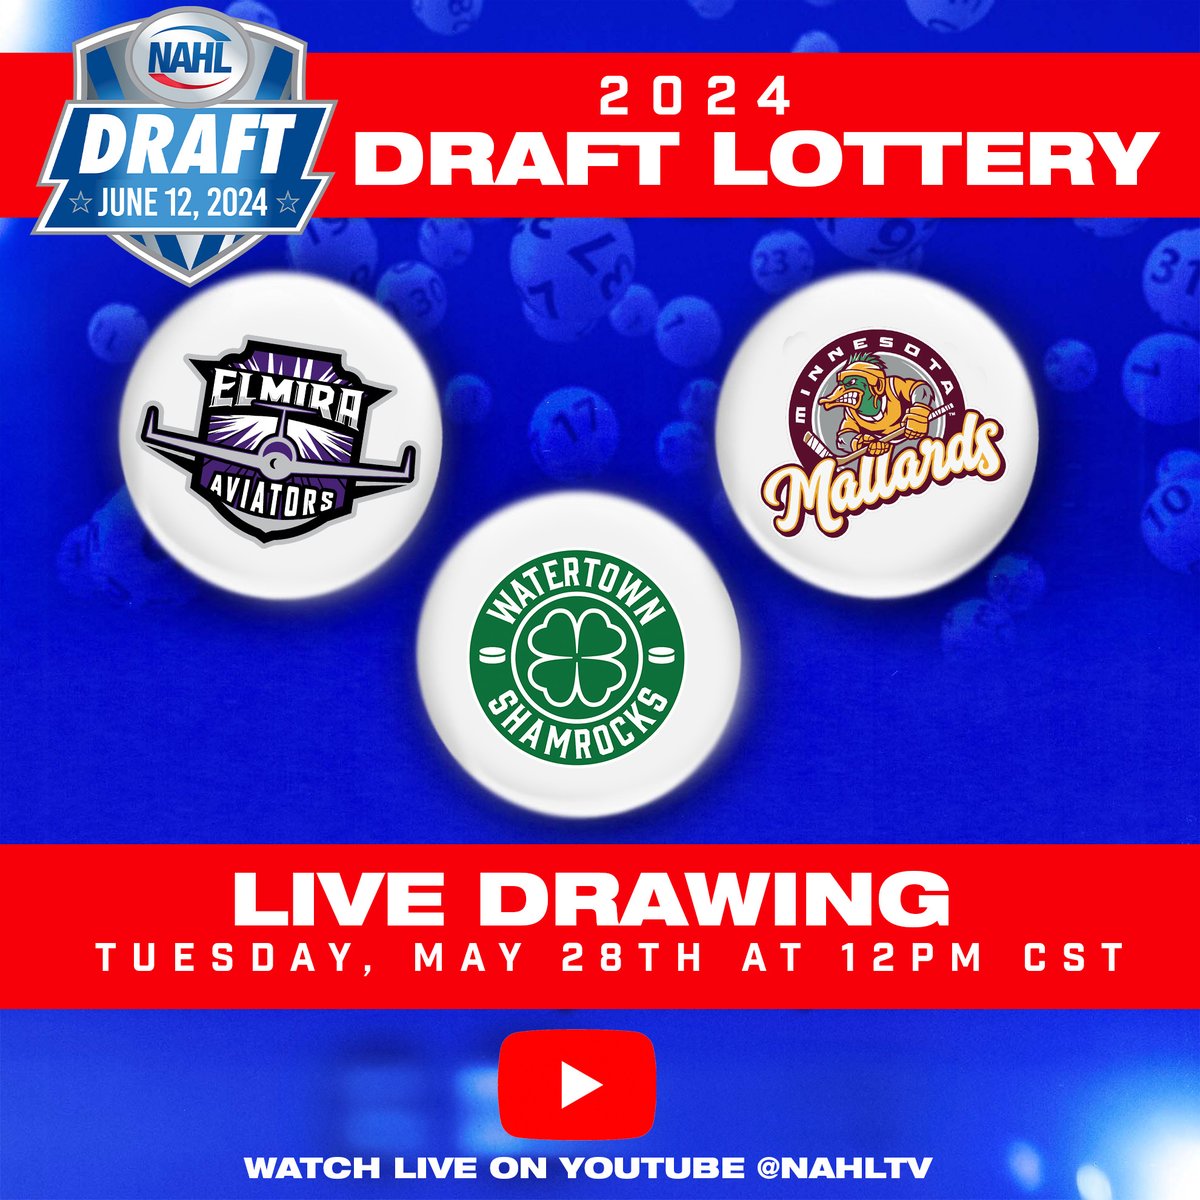 The 2024 NAHL Draft Lottery! Watch live to see who will get the number 1⃣ overall pick for the draft! Watch here📺: youtube.com/@NAHLTV